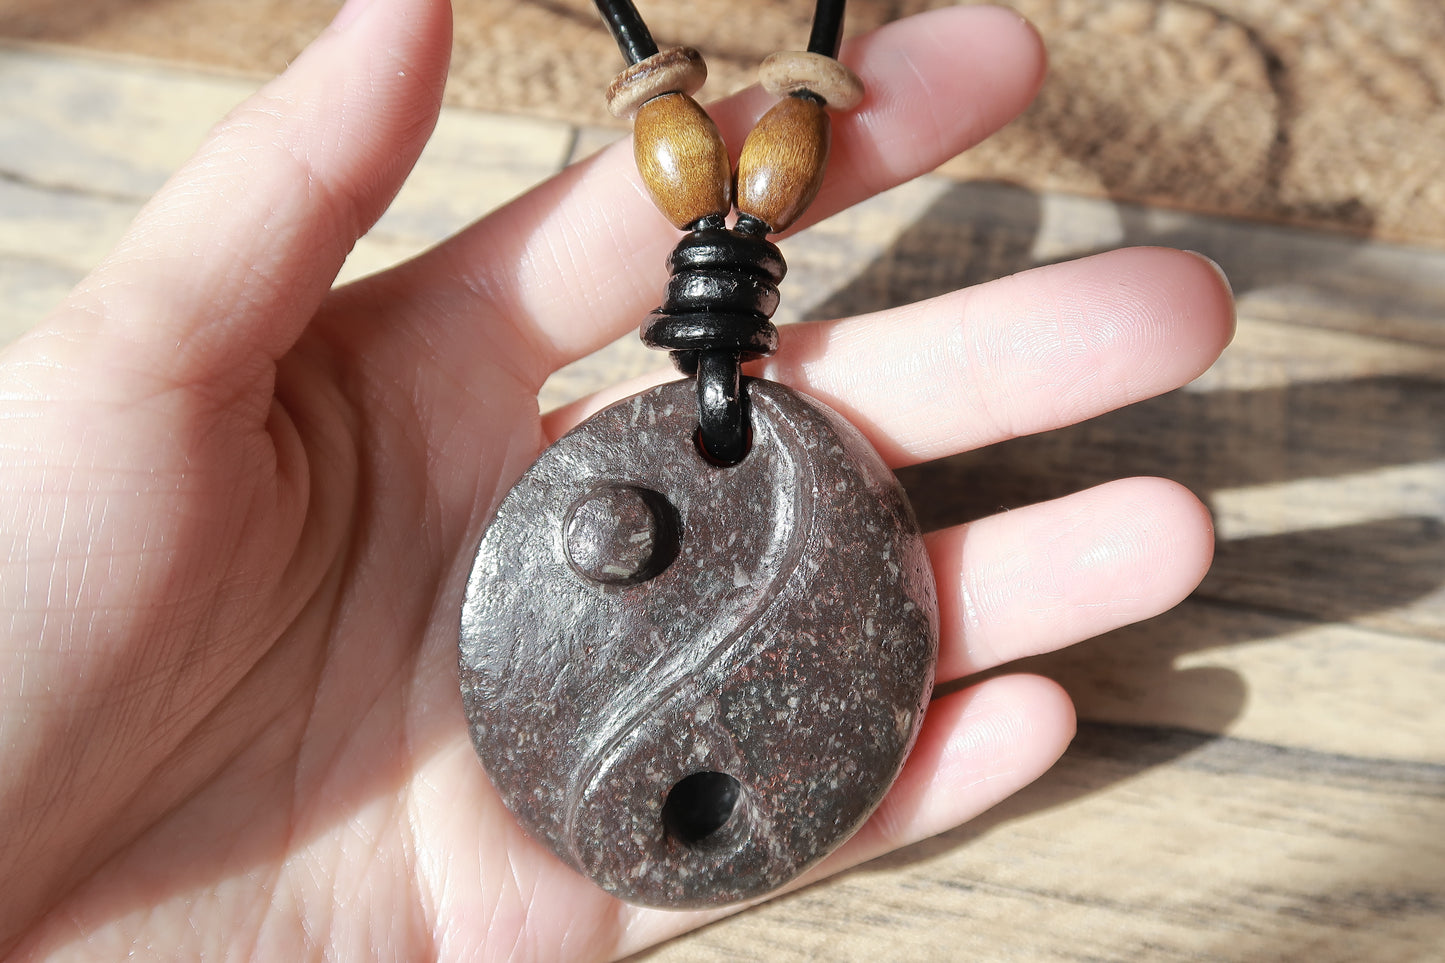 Yin and Yang Necklace | Chinese Symbol Necklace | Taoism Sympol Of Balance And Harmony | Hand Carved Natural Stone Unisex Spritual Jewelry